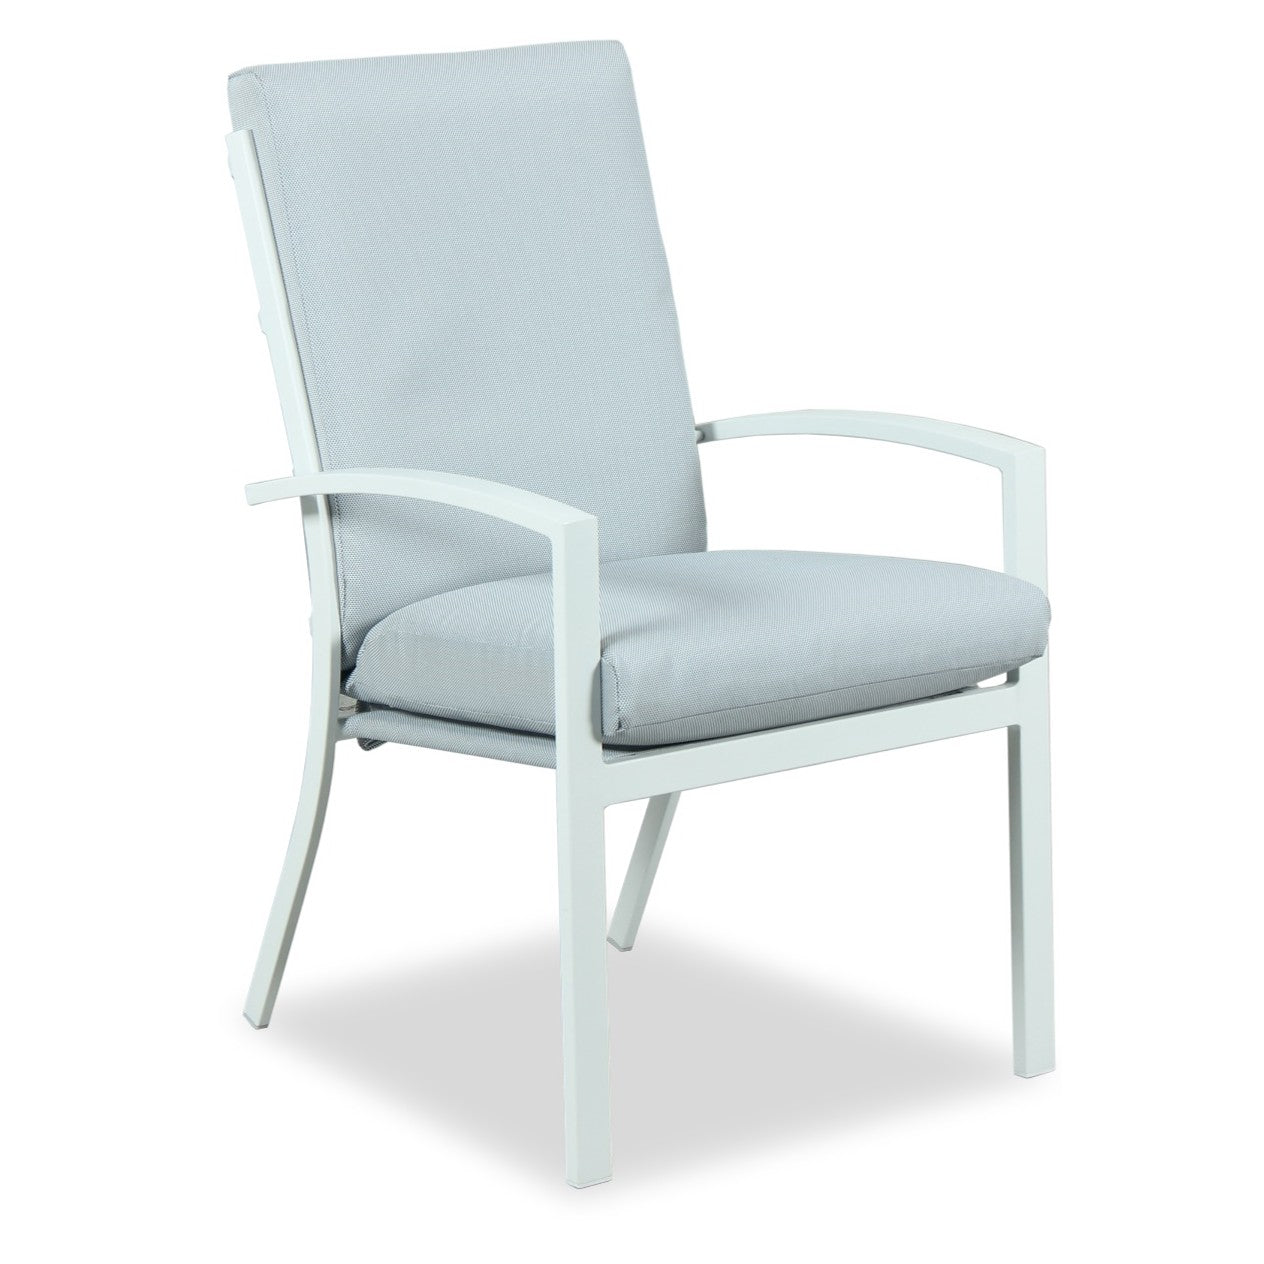 Oslo High Back Outdoor Dining Chair - White - Razzino Furniture